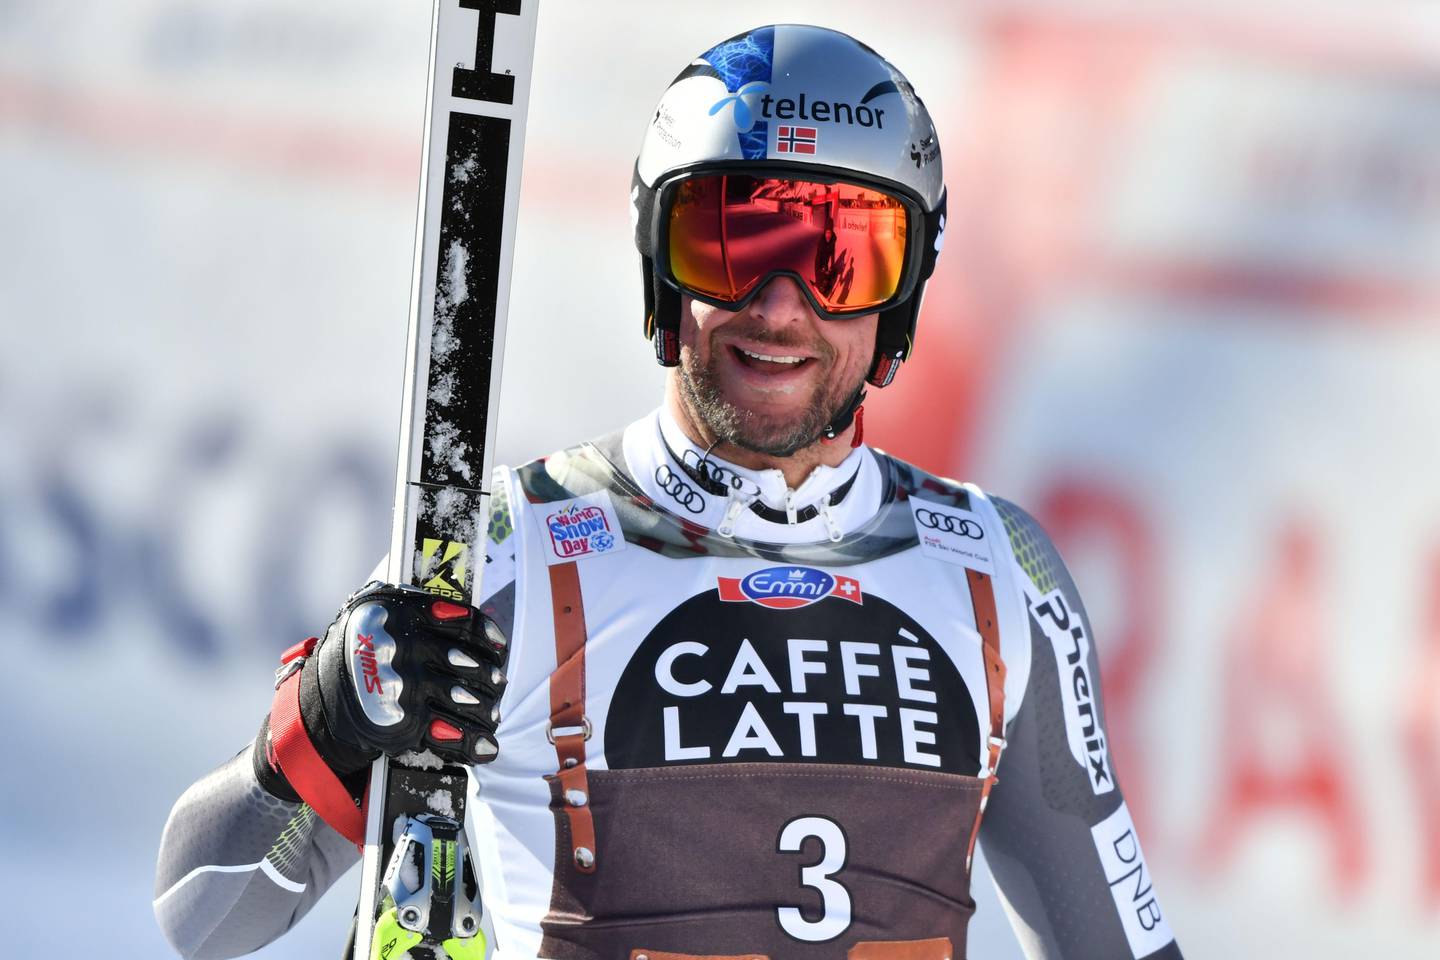 Norway's Aksel Lund Svindal reacts in the finish area after competing in the Men's Downhill of the Lauberhorn during the FIS Alpine Ski World Cup, on January 19, 2019, in Wengen. (Photo by Fabrice COFFRINI / AFP)